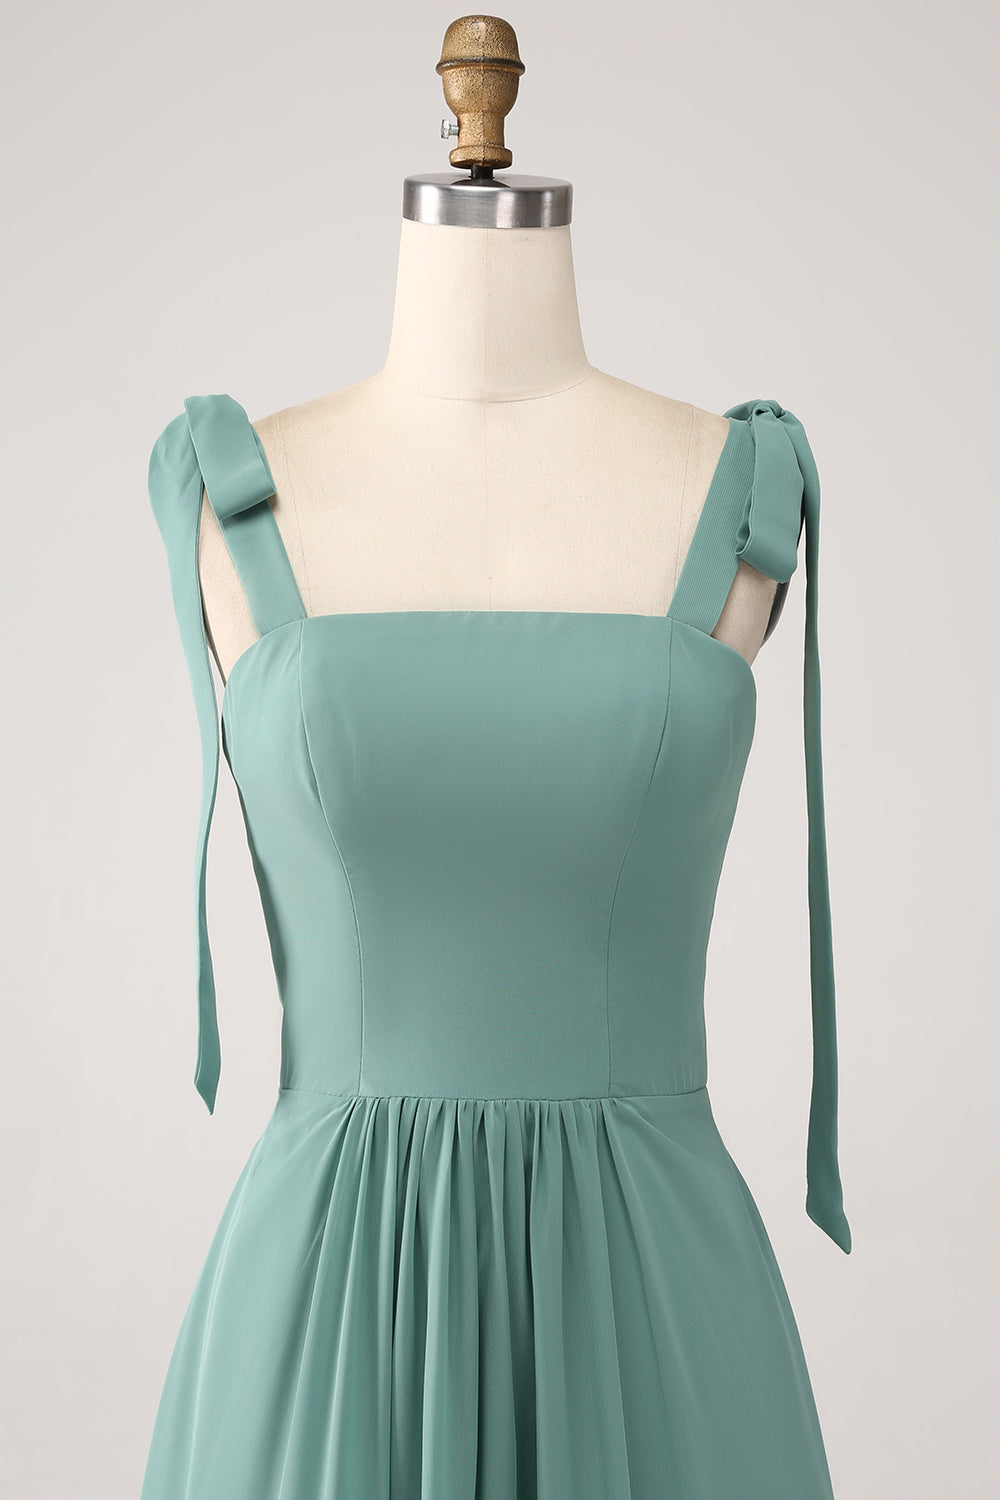 A Line Chiffon Green Long Bridesmaid Dress with Pleated